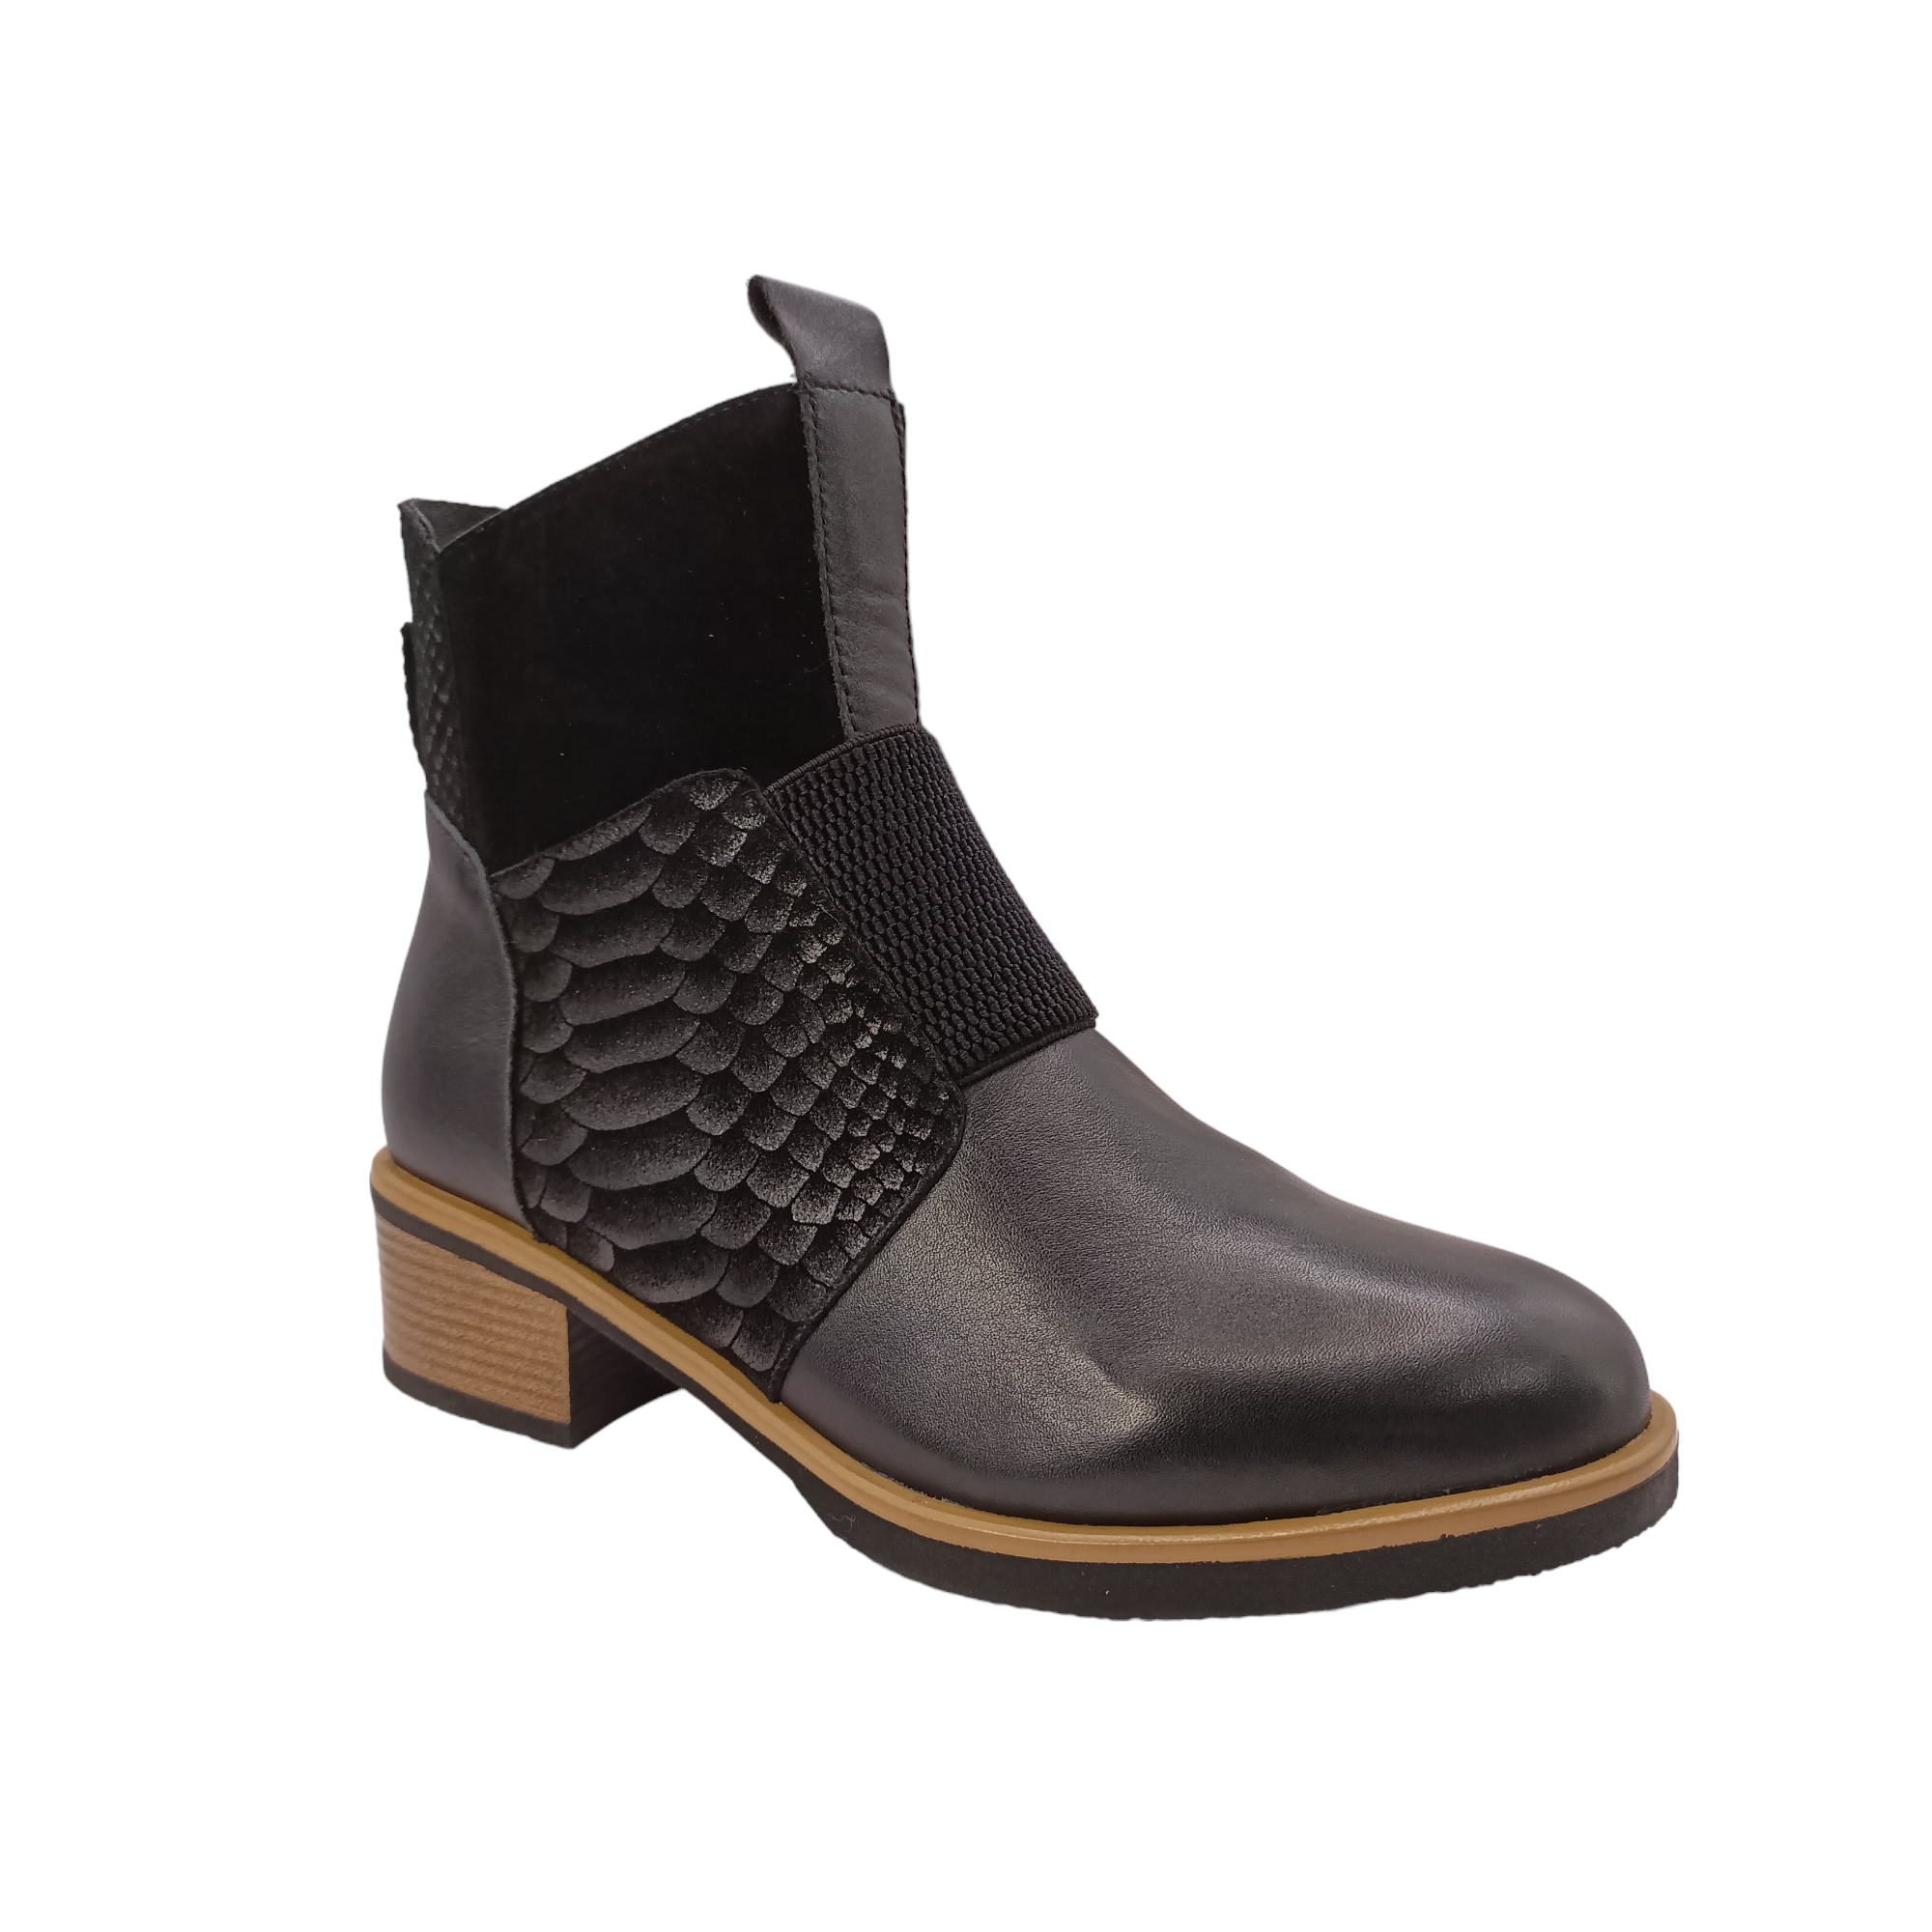 Shop Dread Bresley - with shoe&amp;me - from Bresley - Boots - boots, Winter, Womens - [collection]